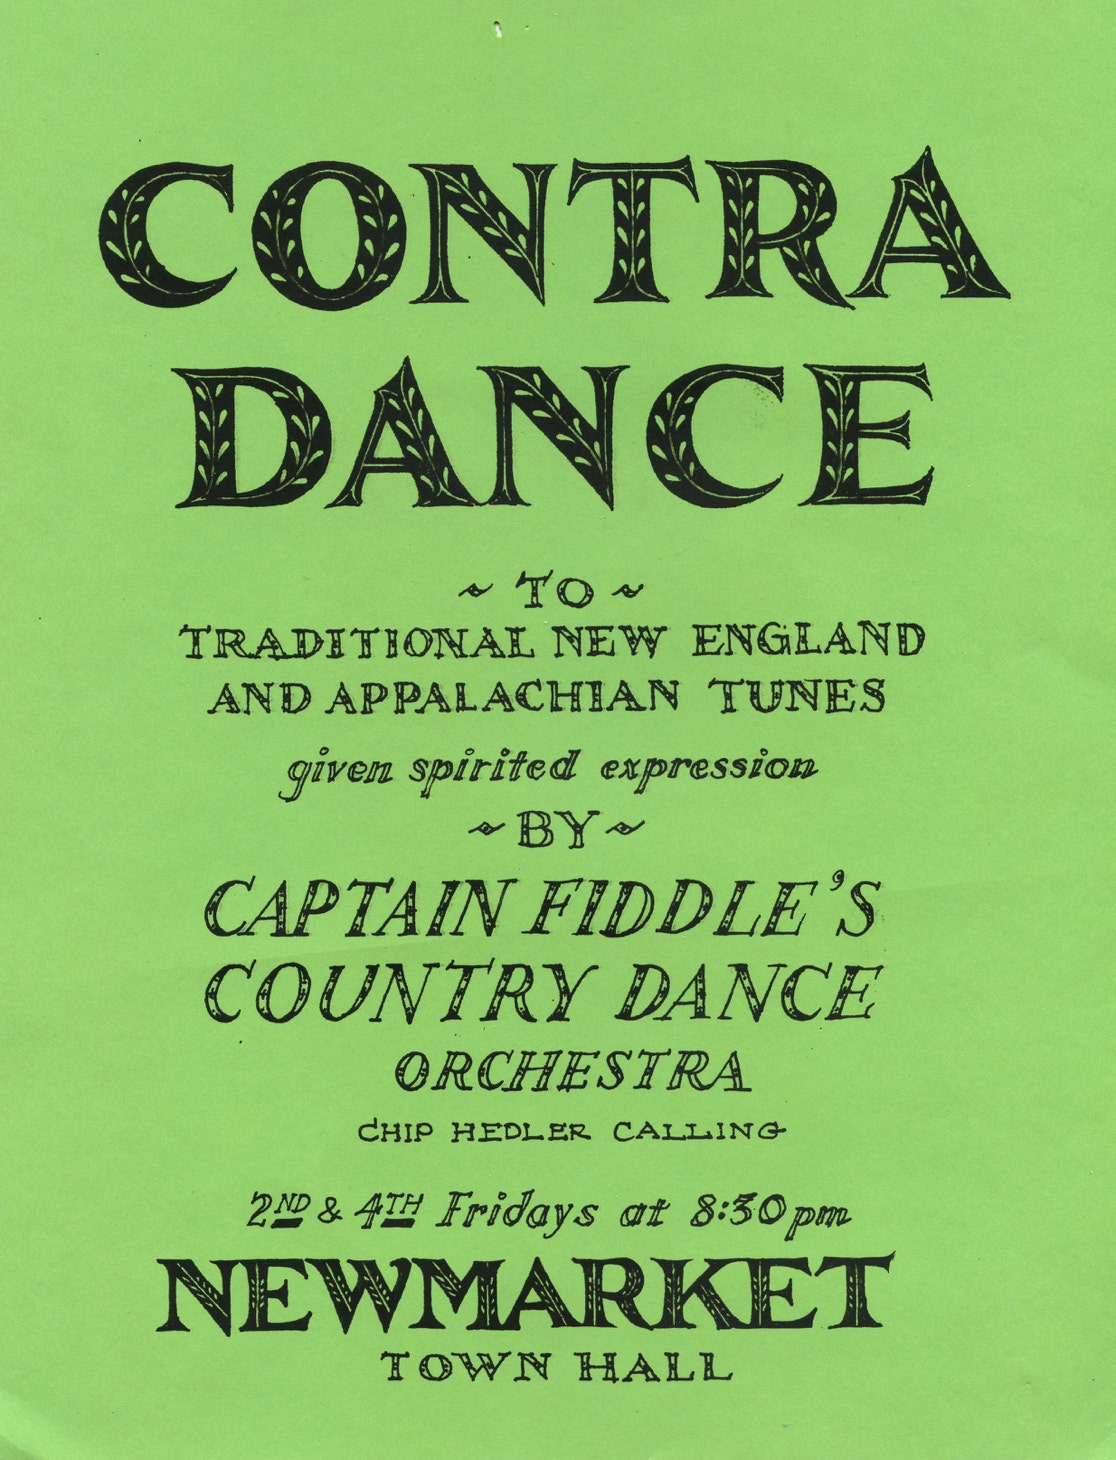 Poster for a Contra Dance, Newmarket, New Hampshire, Captain Fiddle